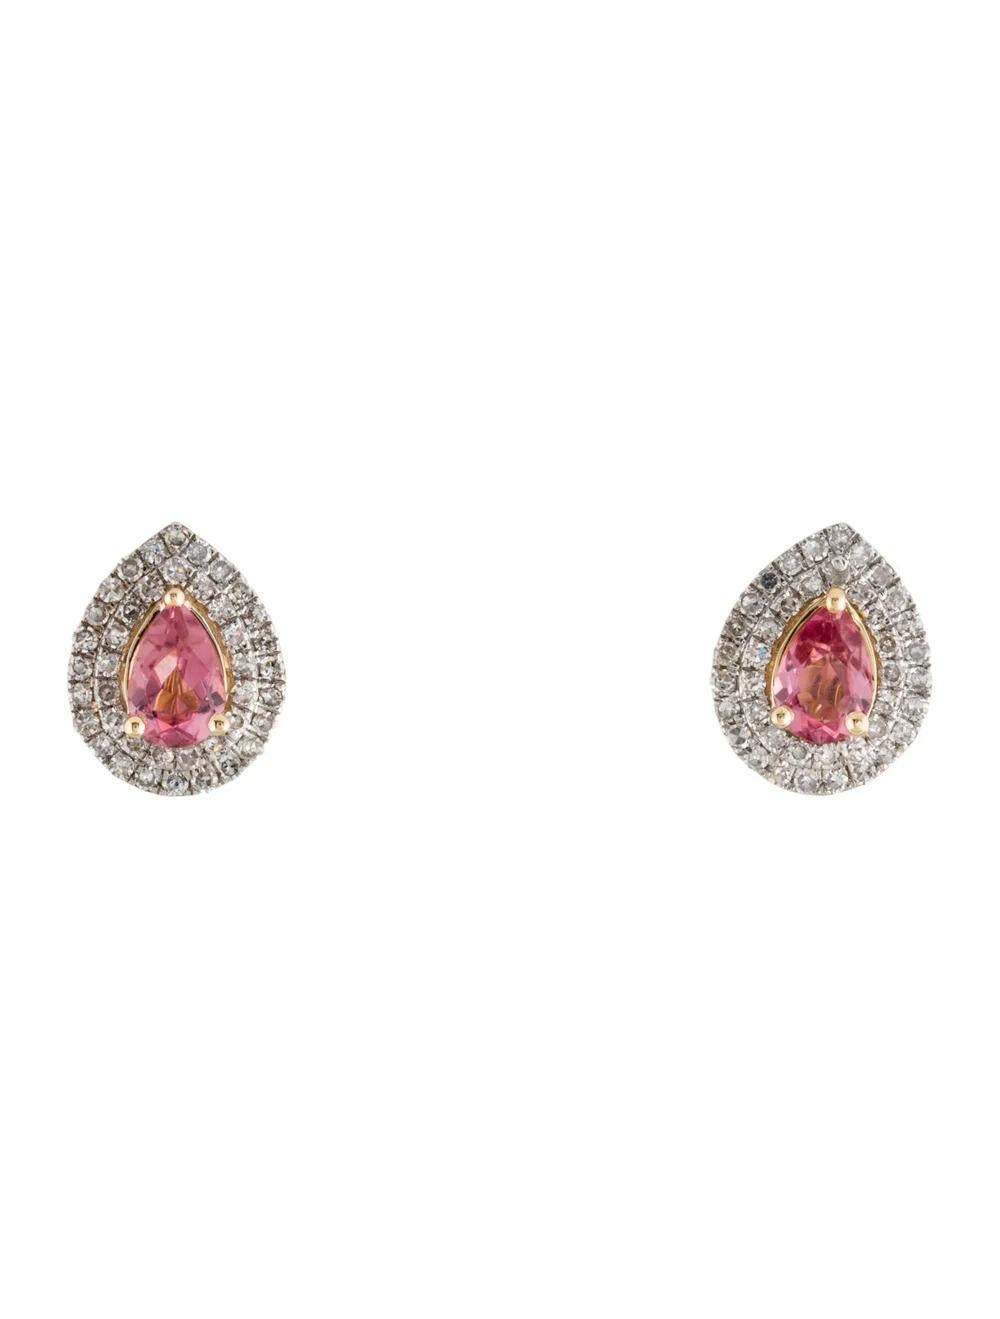 Introducing our stunning Rhodium-Plated & 14K Yellow Gold Tourmaline & Diamond Stud Earrings, a luxurious blend of elegance and sophistication.

Specifications:

* Metal: Rhodium-Plated & 14K Yellow Gold
* Length: 0.5